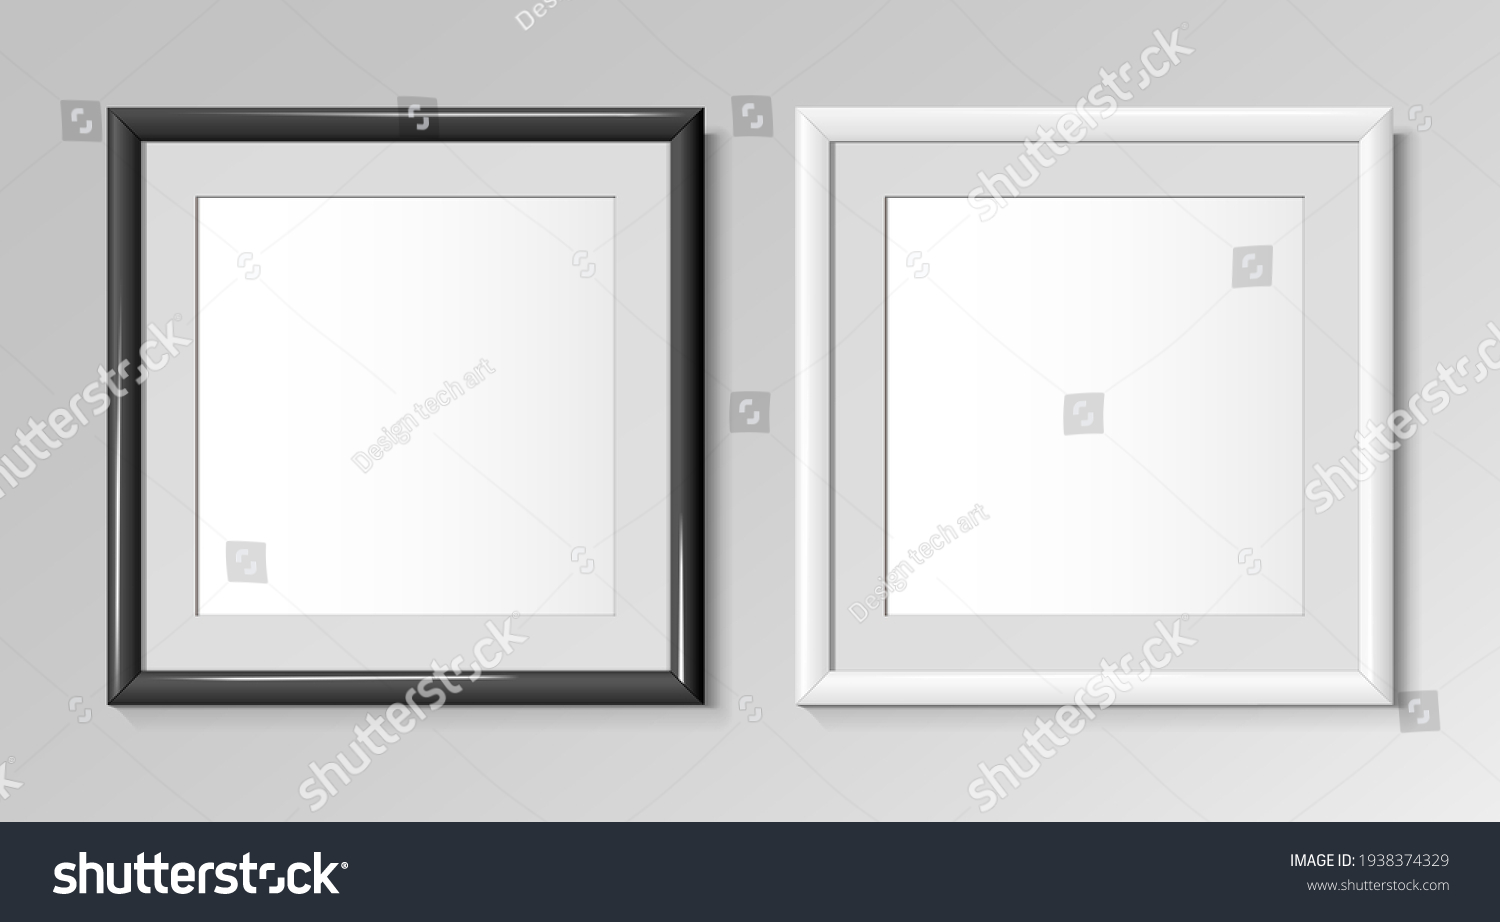 Realistic square black and white frames for paintings or photographs. Vector illustration. #1938374329